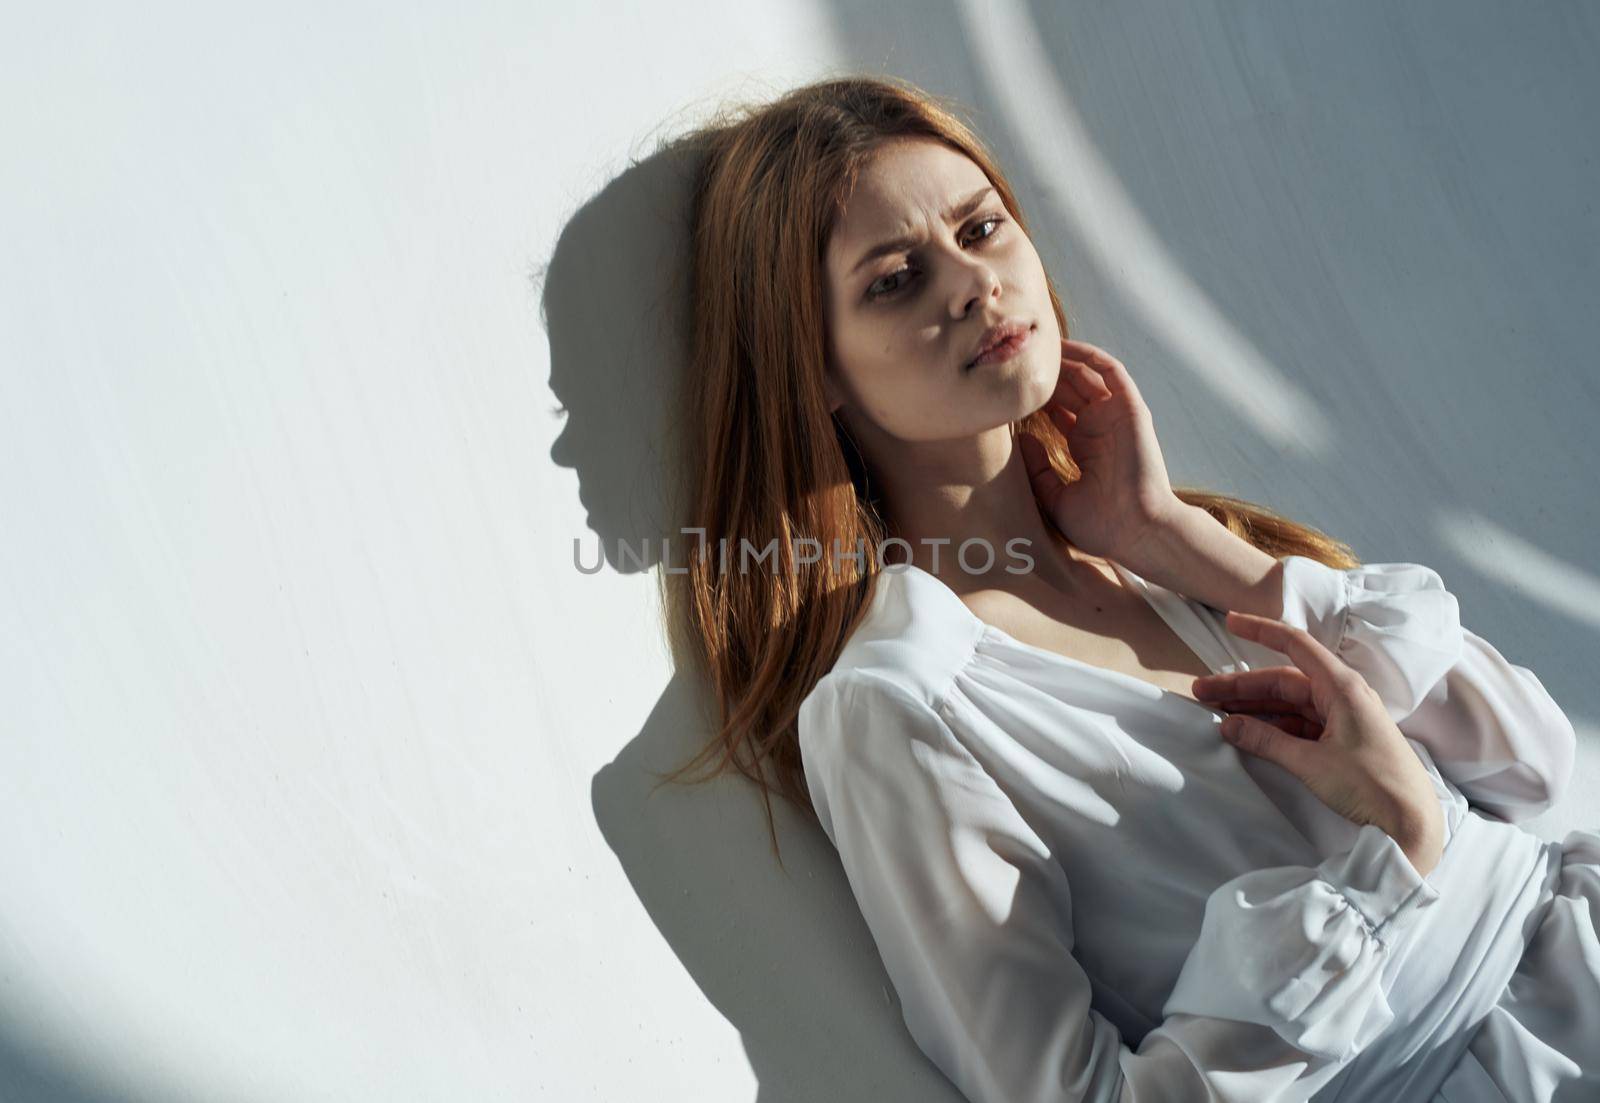 Woman on a light background in white clothes makeup red hair. High quality photo